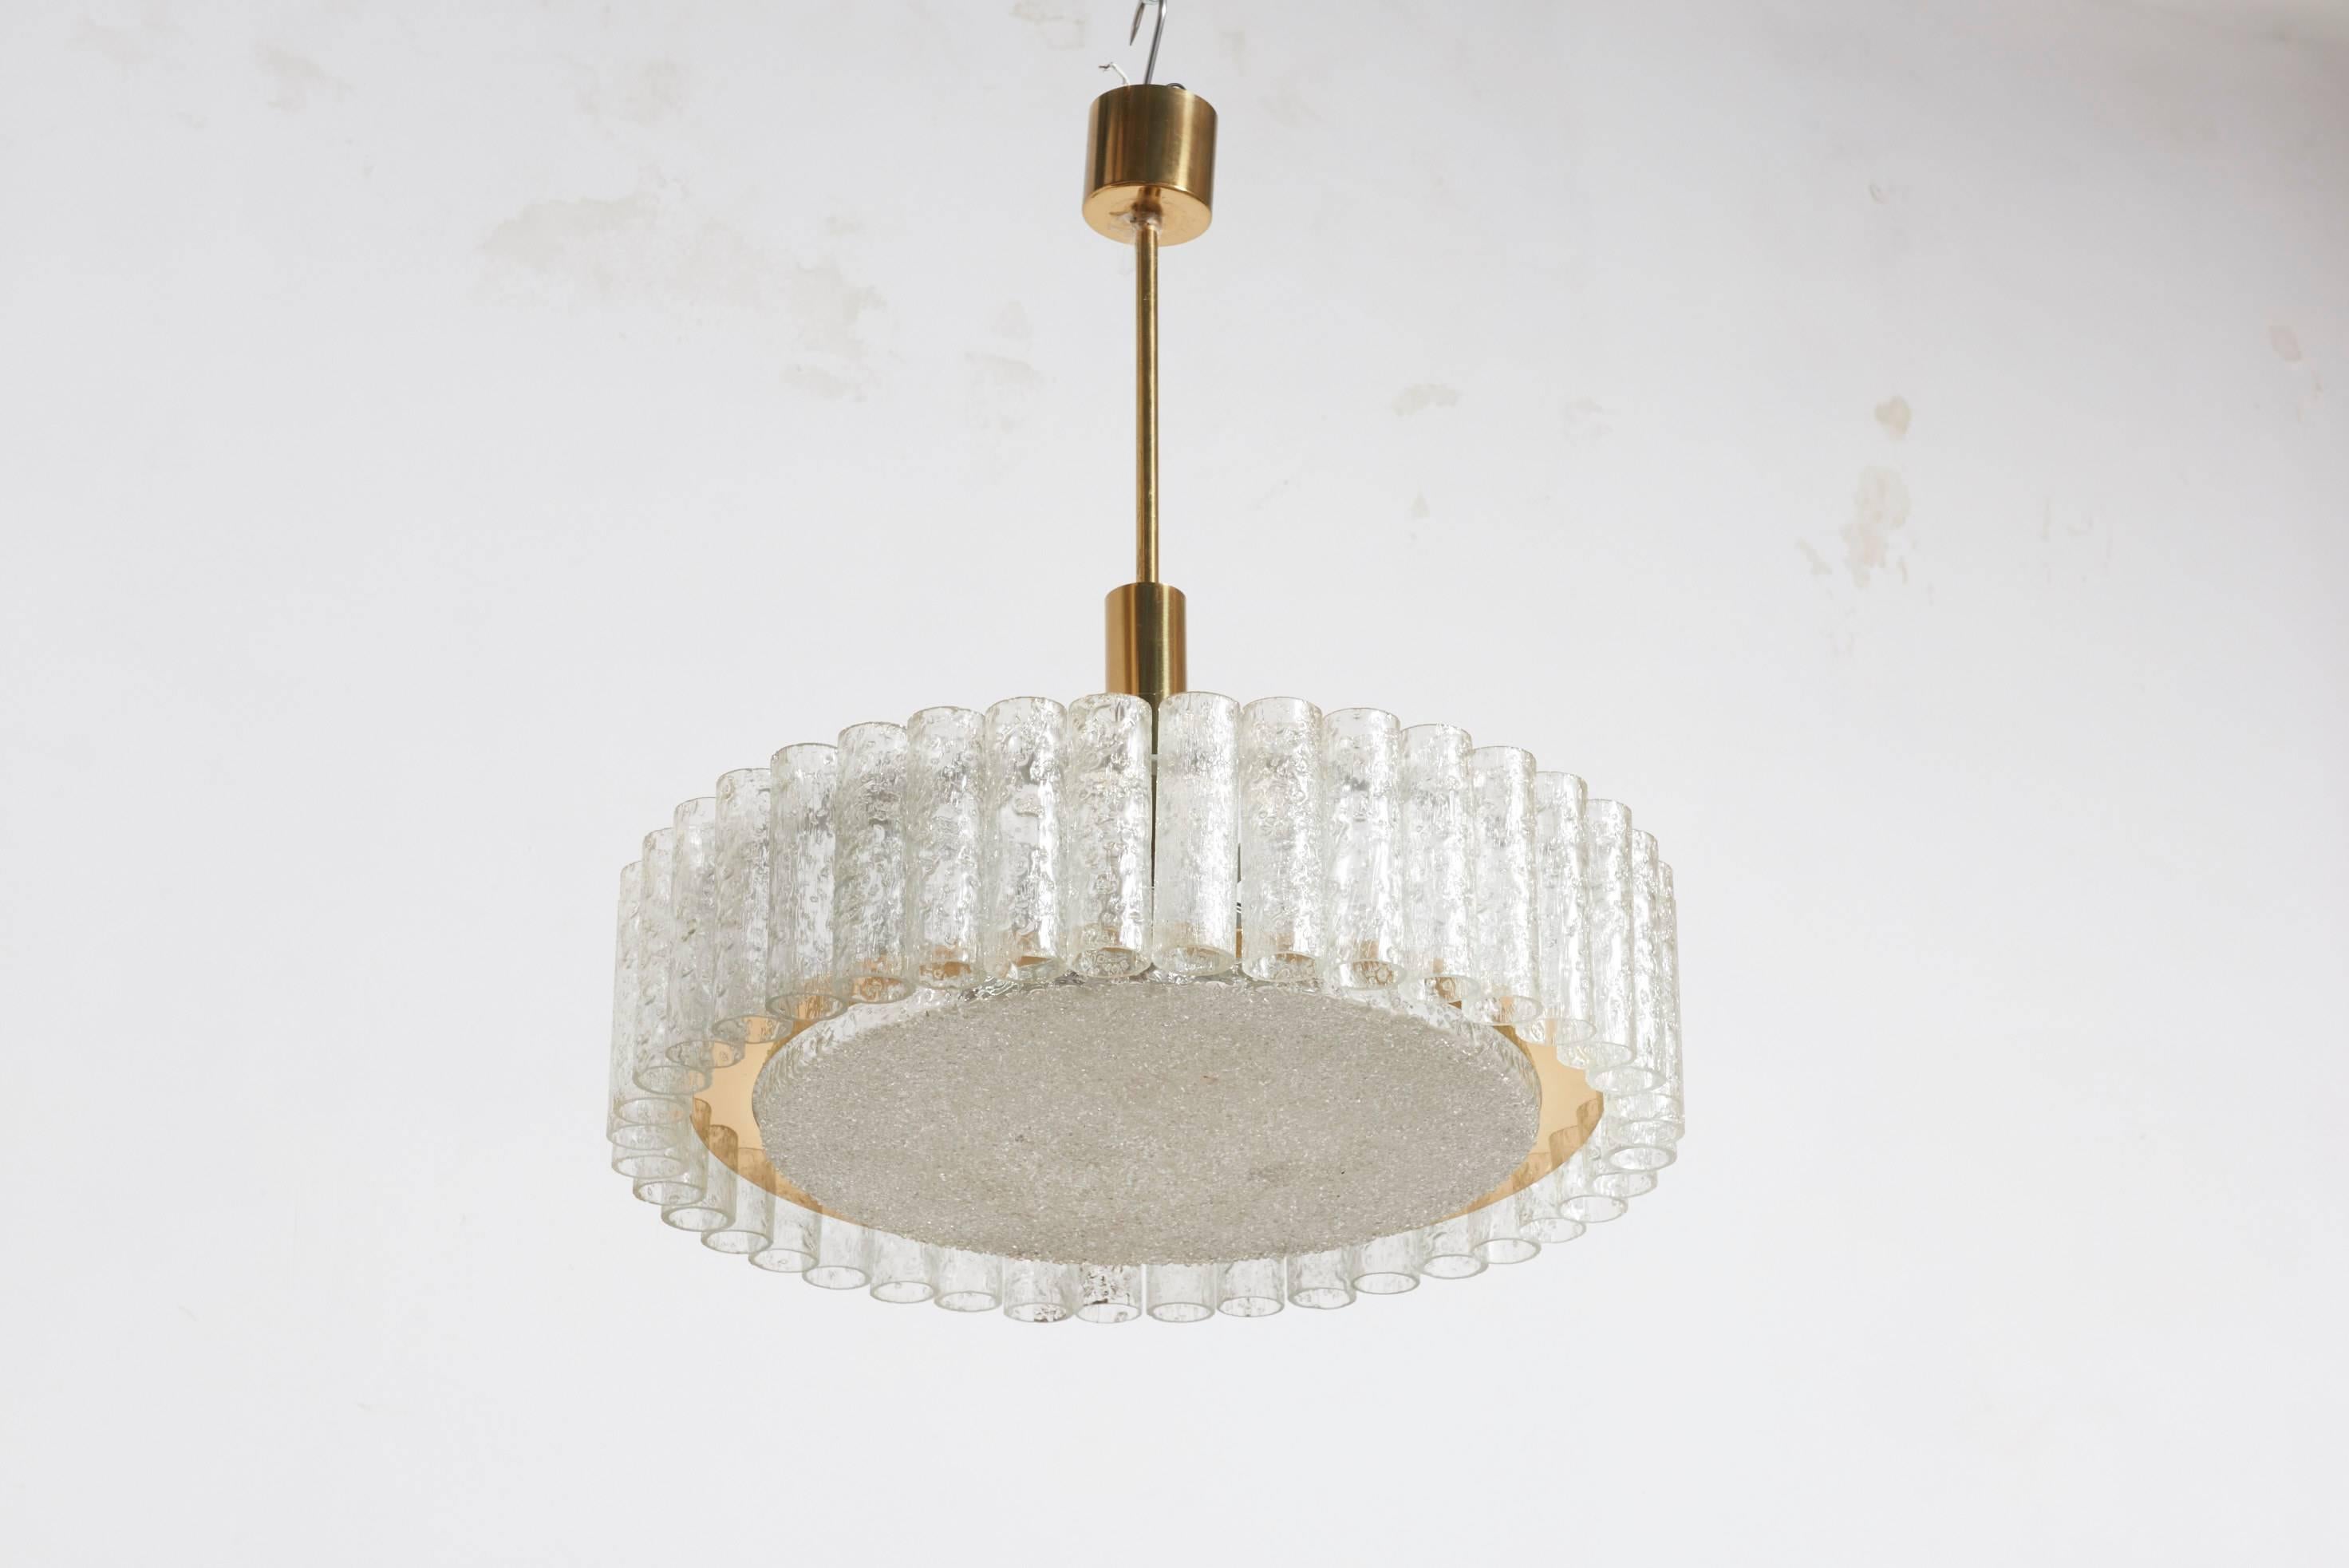 Large ice textured glass chandelier, one ring of glass cylinders suspended from a brass ring and textured disc, by Doria, Germany 1960s.